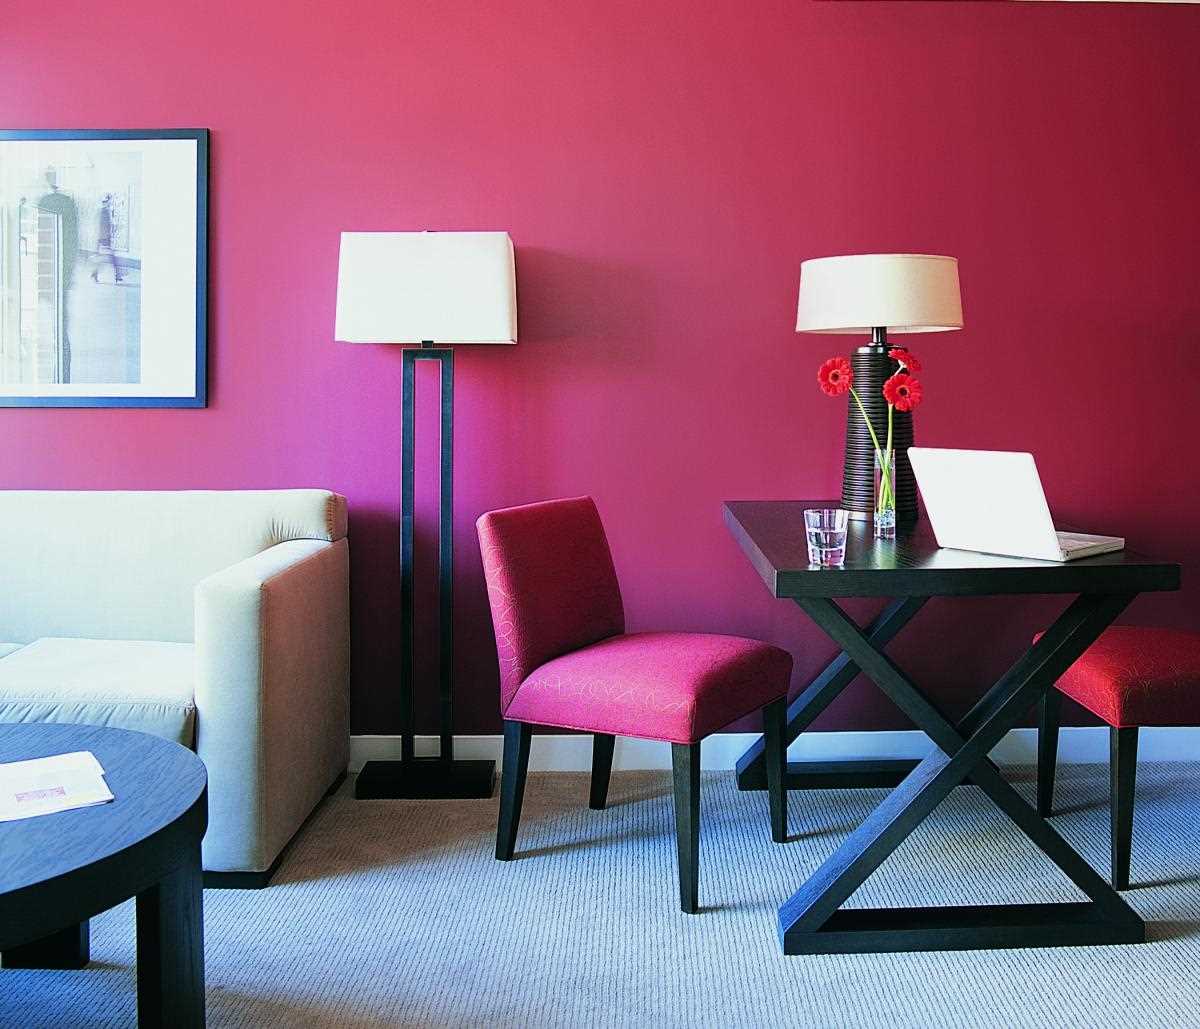 An example of using pink in a bright apartment interior